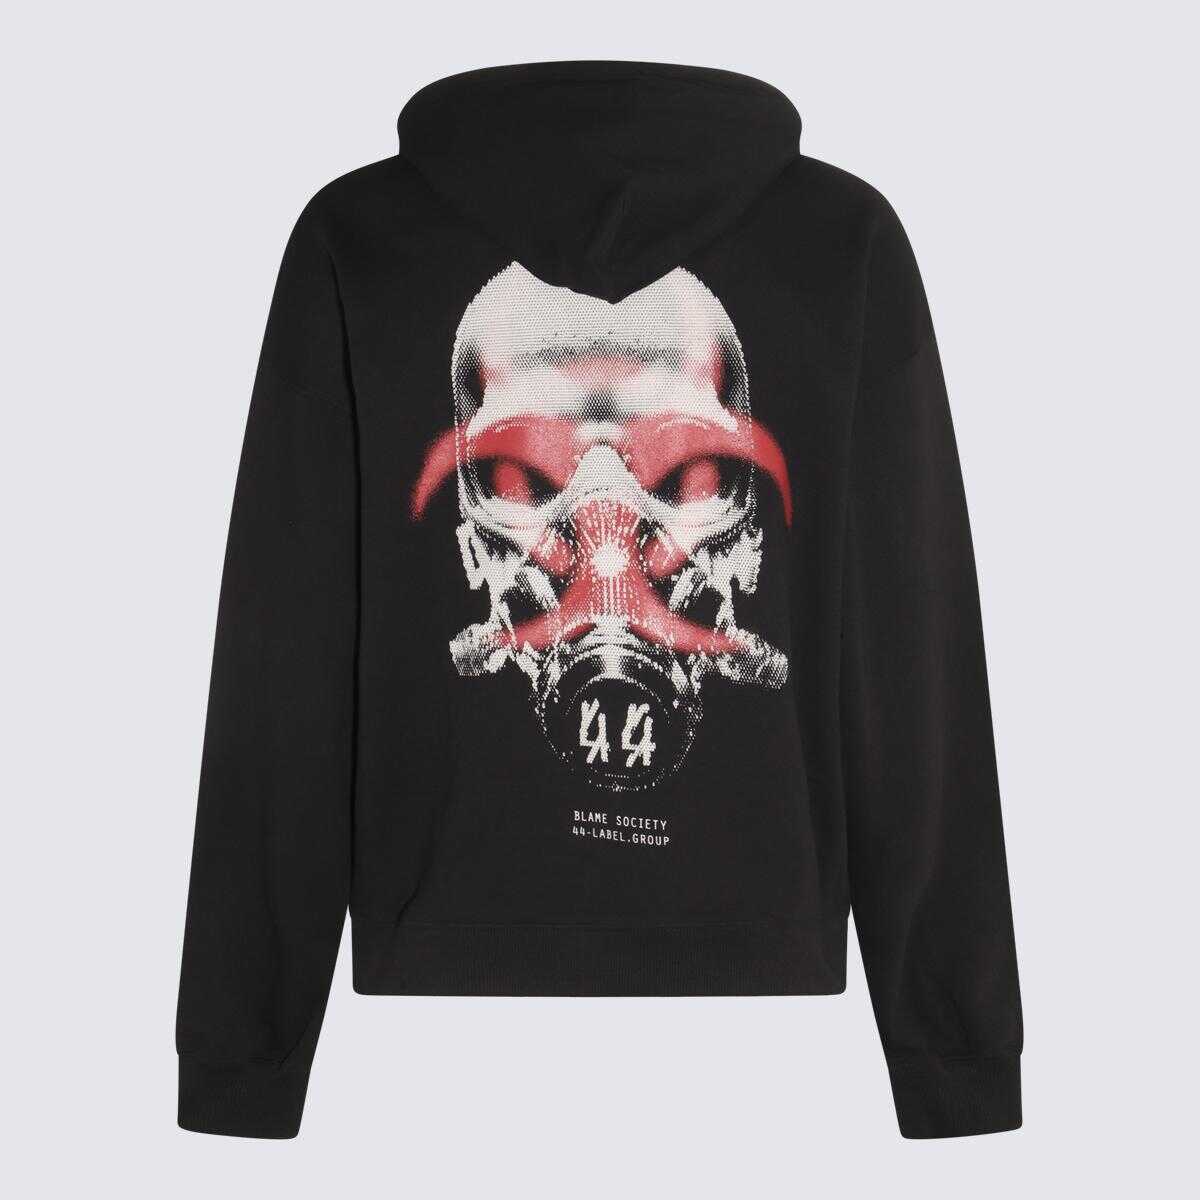 M44 LABEL GROUP M44 LABEL GROUP BLACK, WHITE AND RED COTTON SWEATSHIRT BLACK